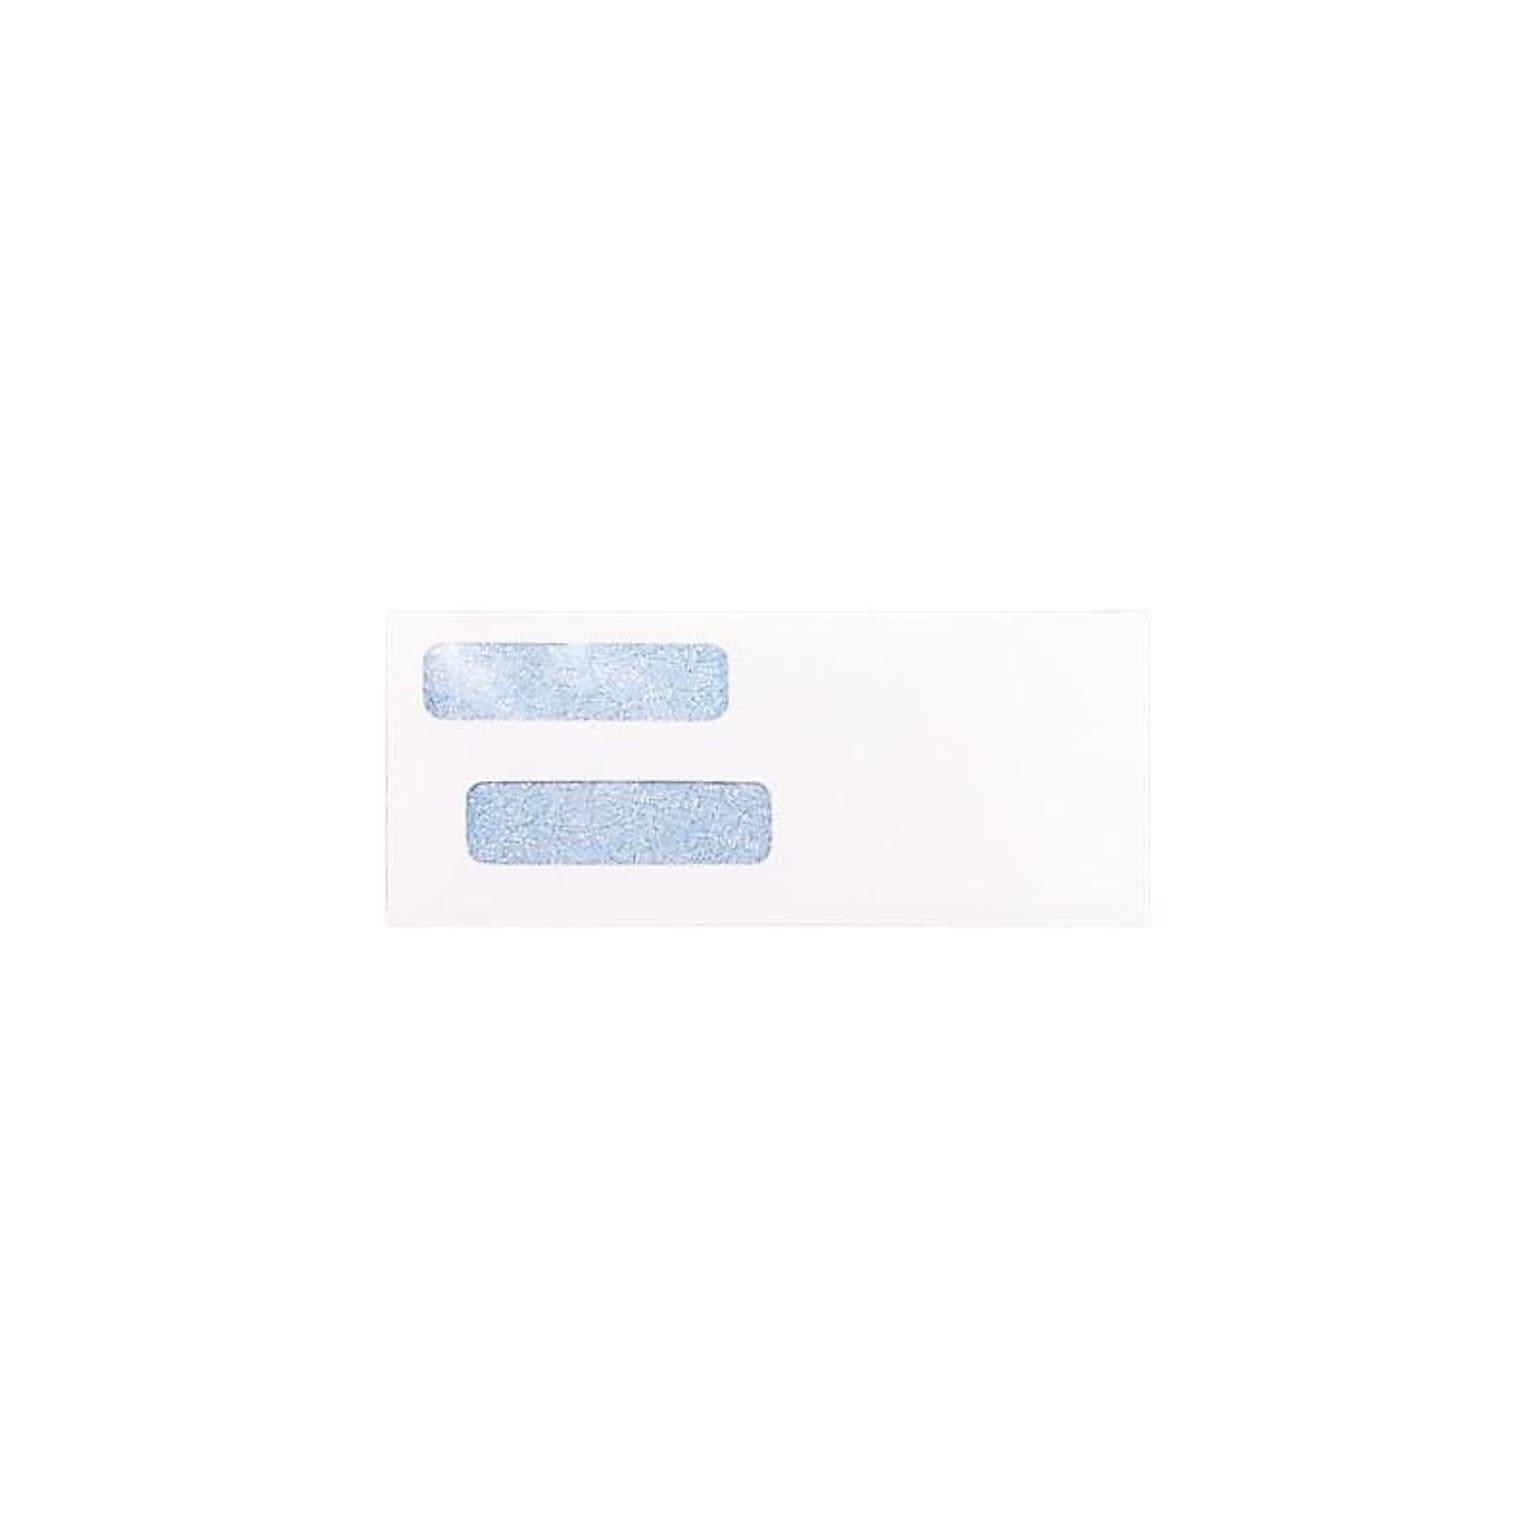 LUX Accounting Software Gummed Security Tinted Business Envelopes, 3 9/16 x 8 3/4, White, 250/Pack (WS-2371-250)